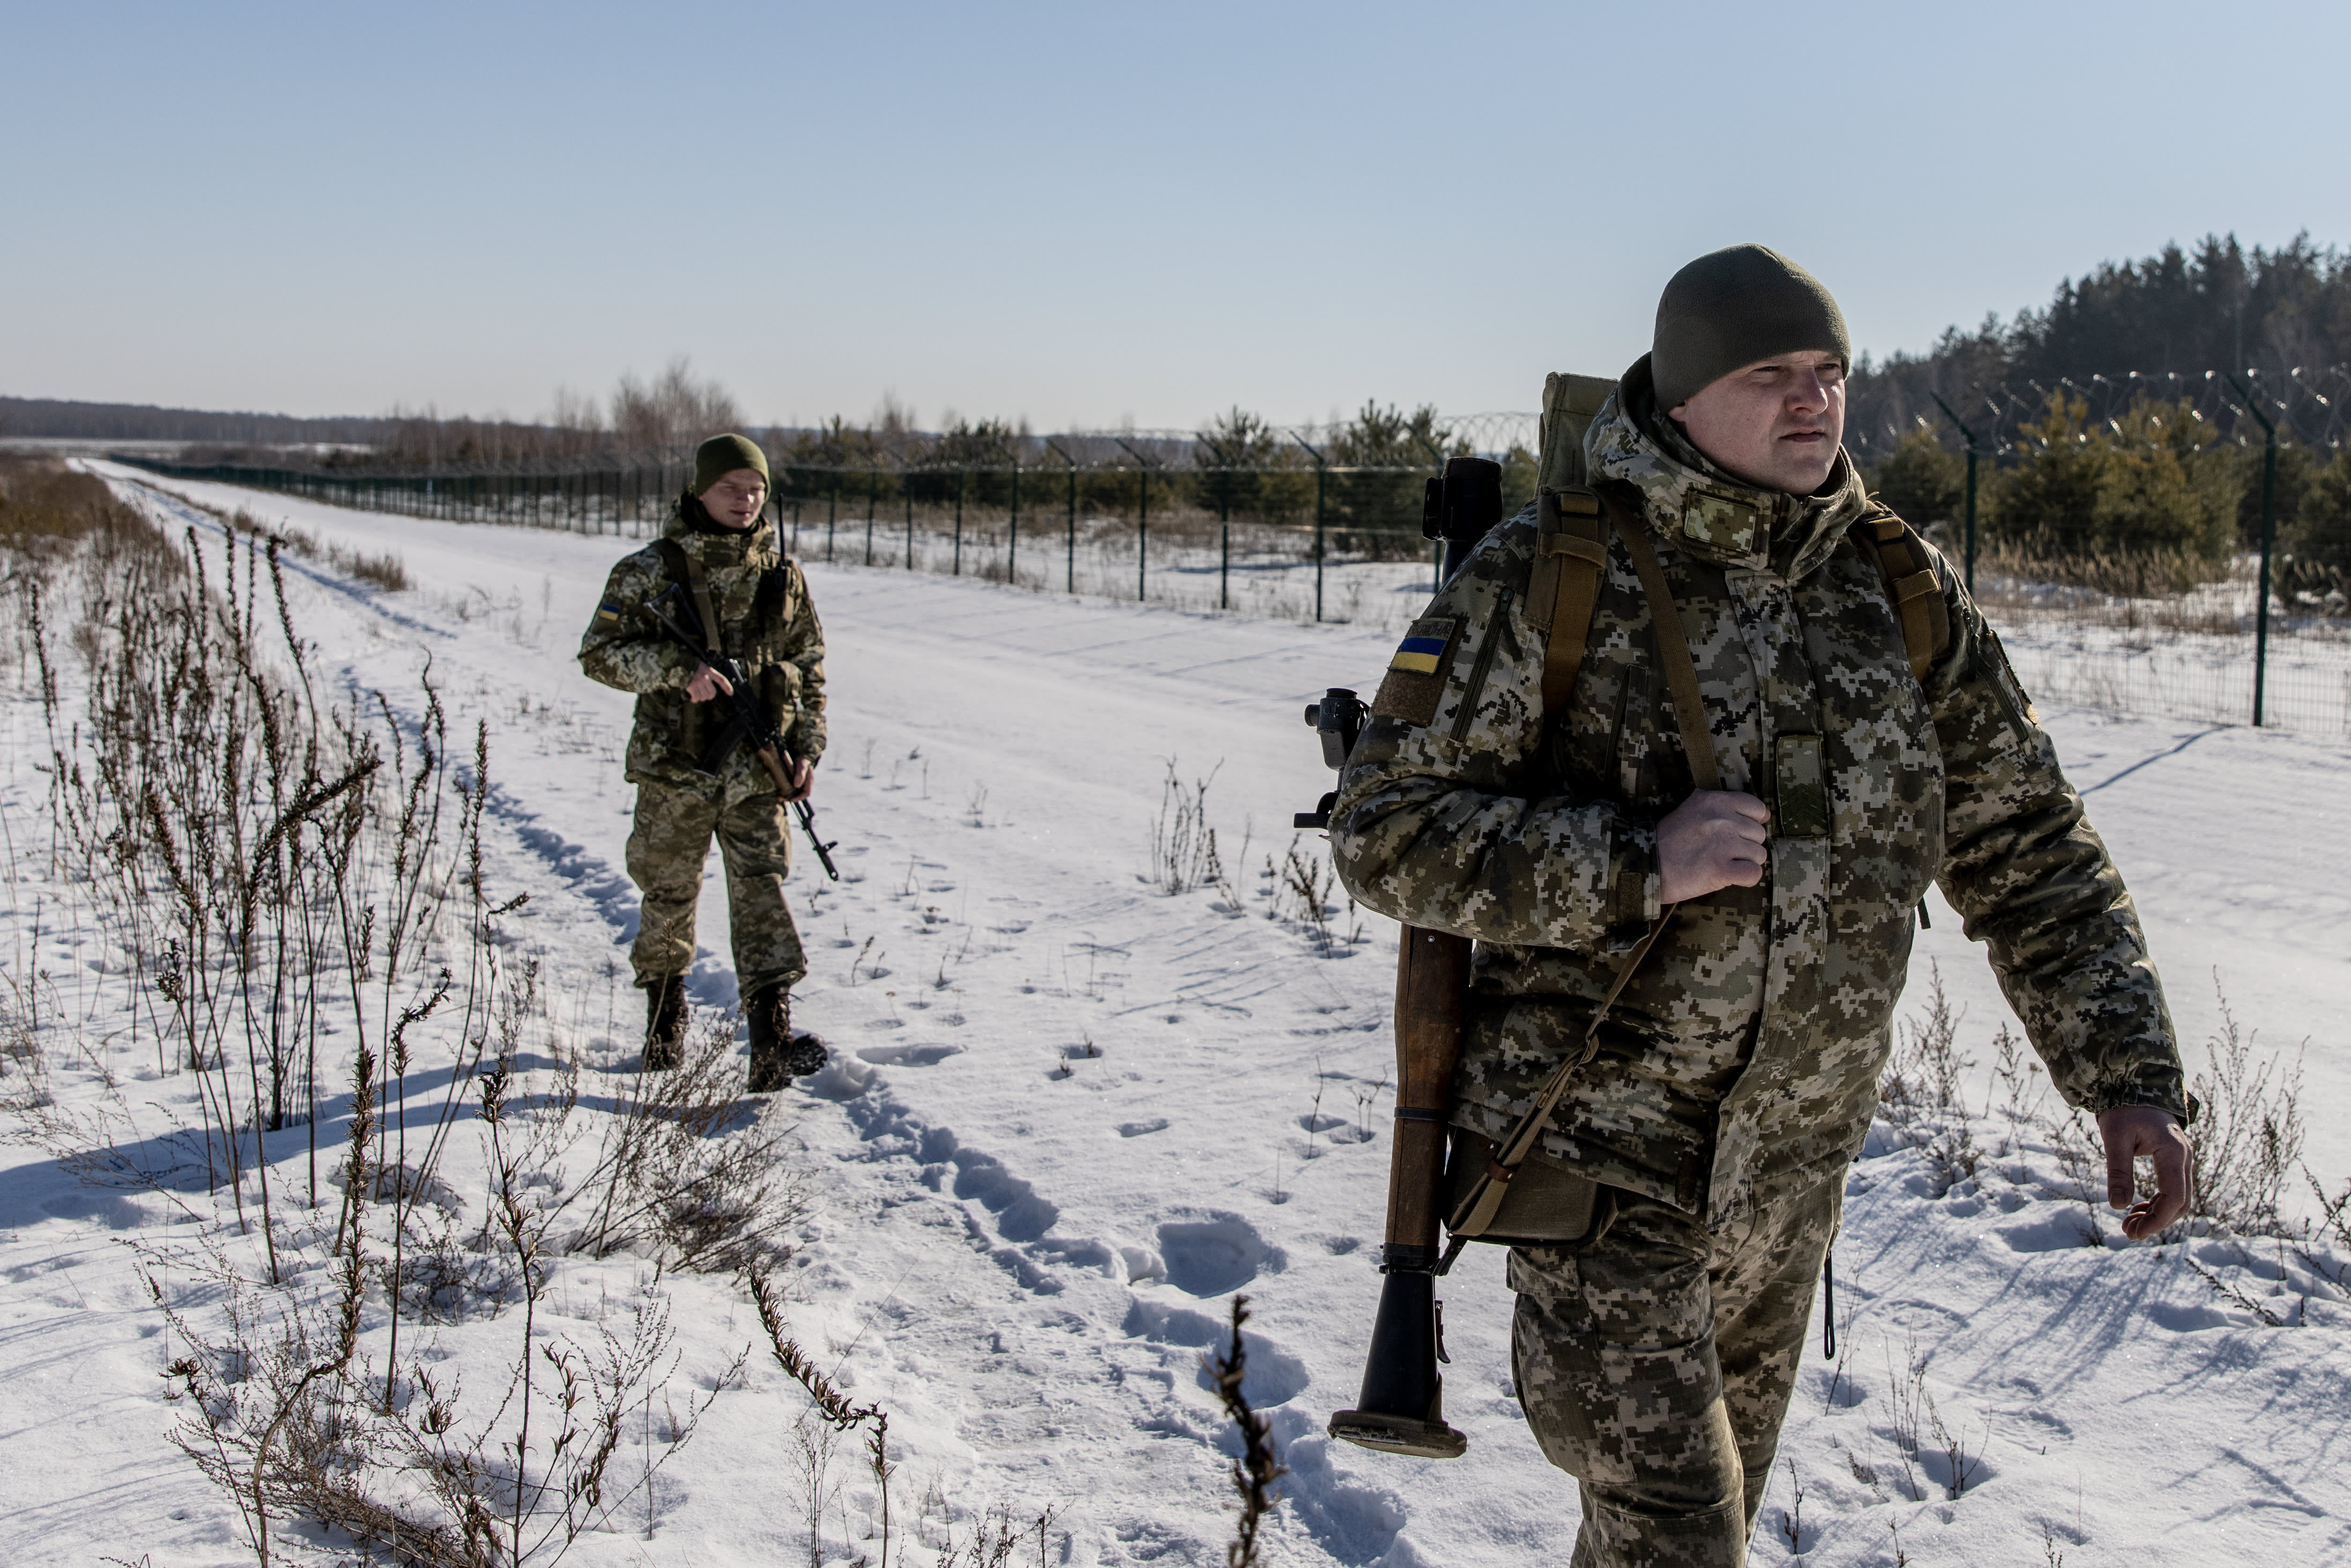 Russia may think it's better to invade Ukraine than to back down: FPRI